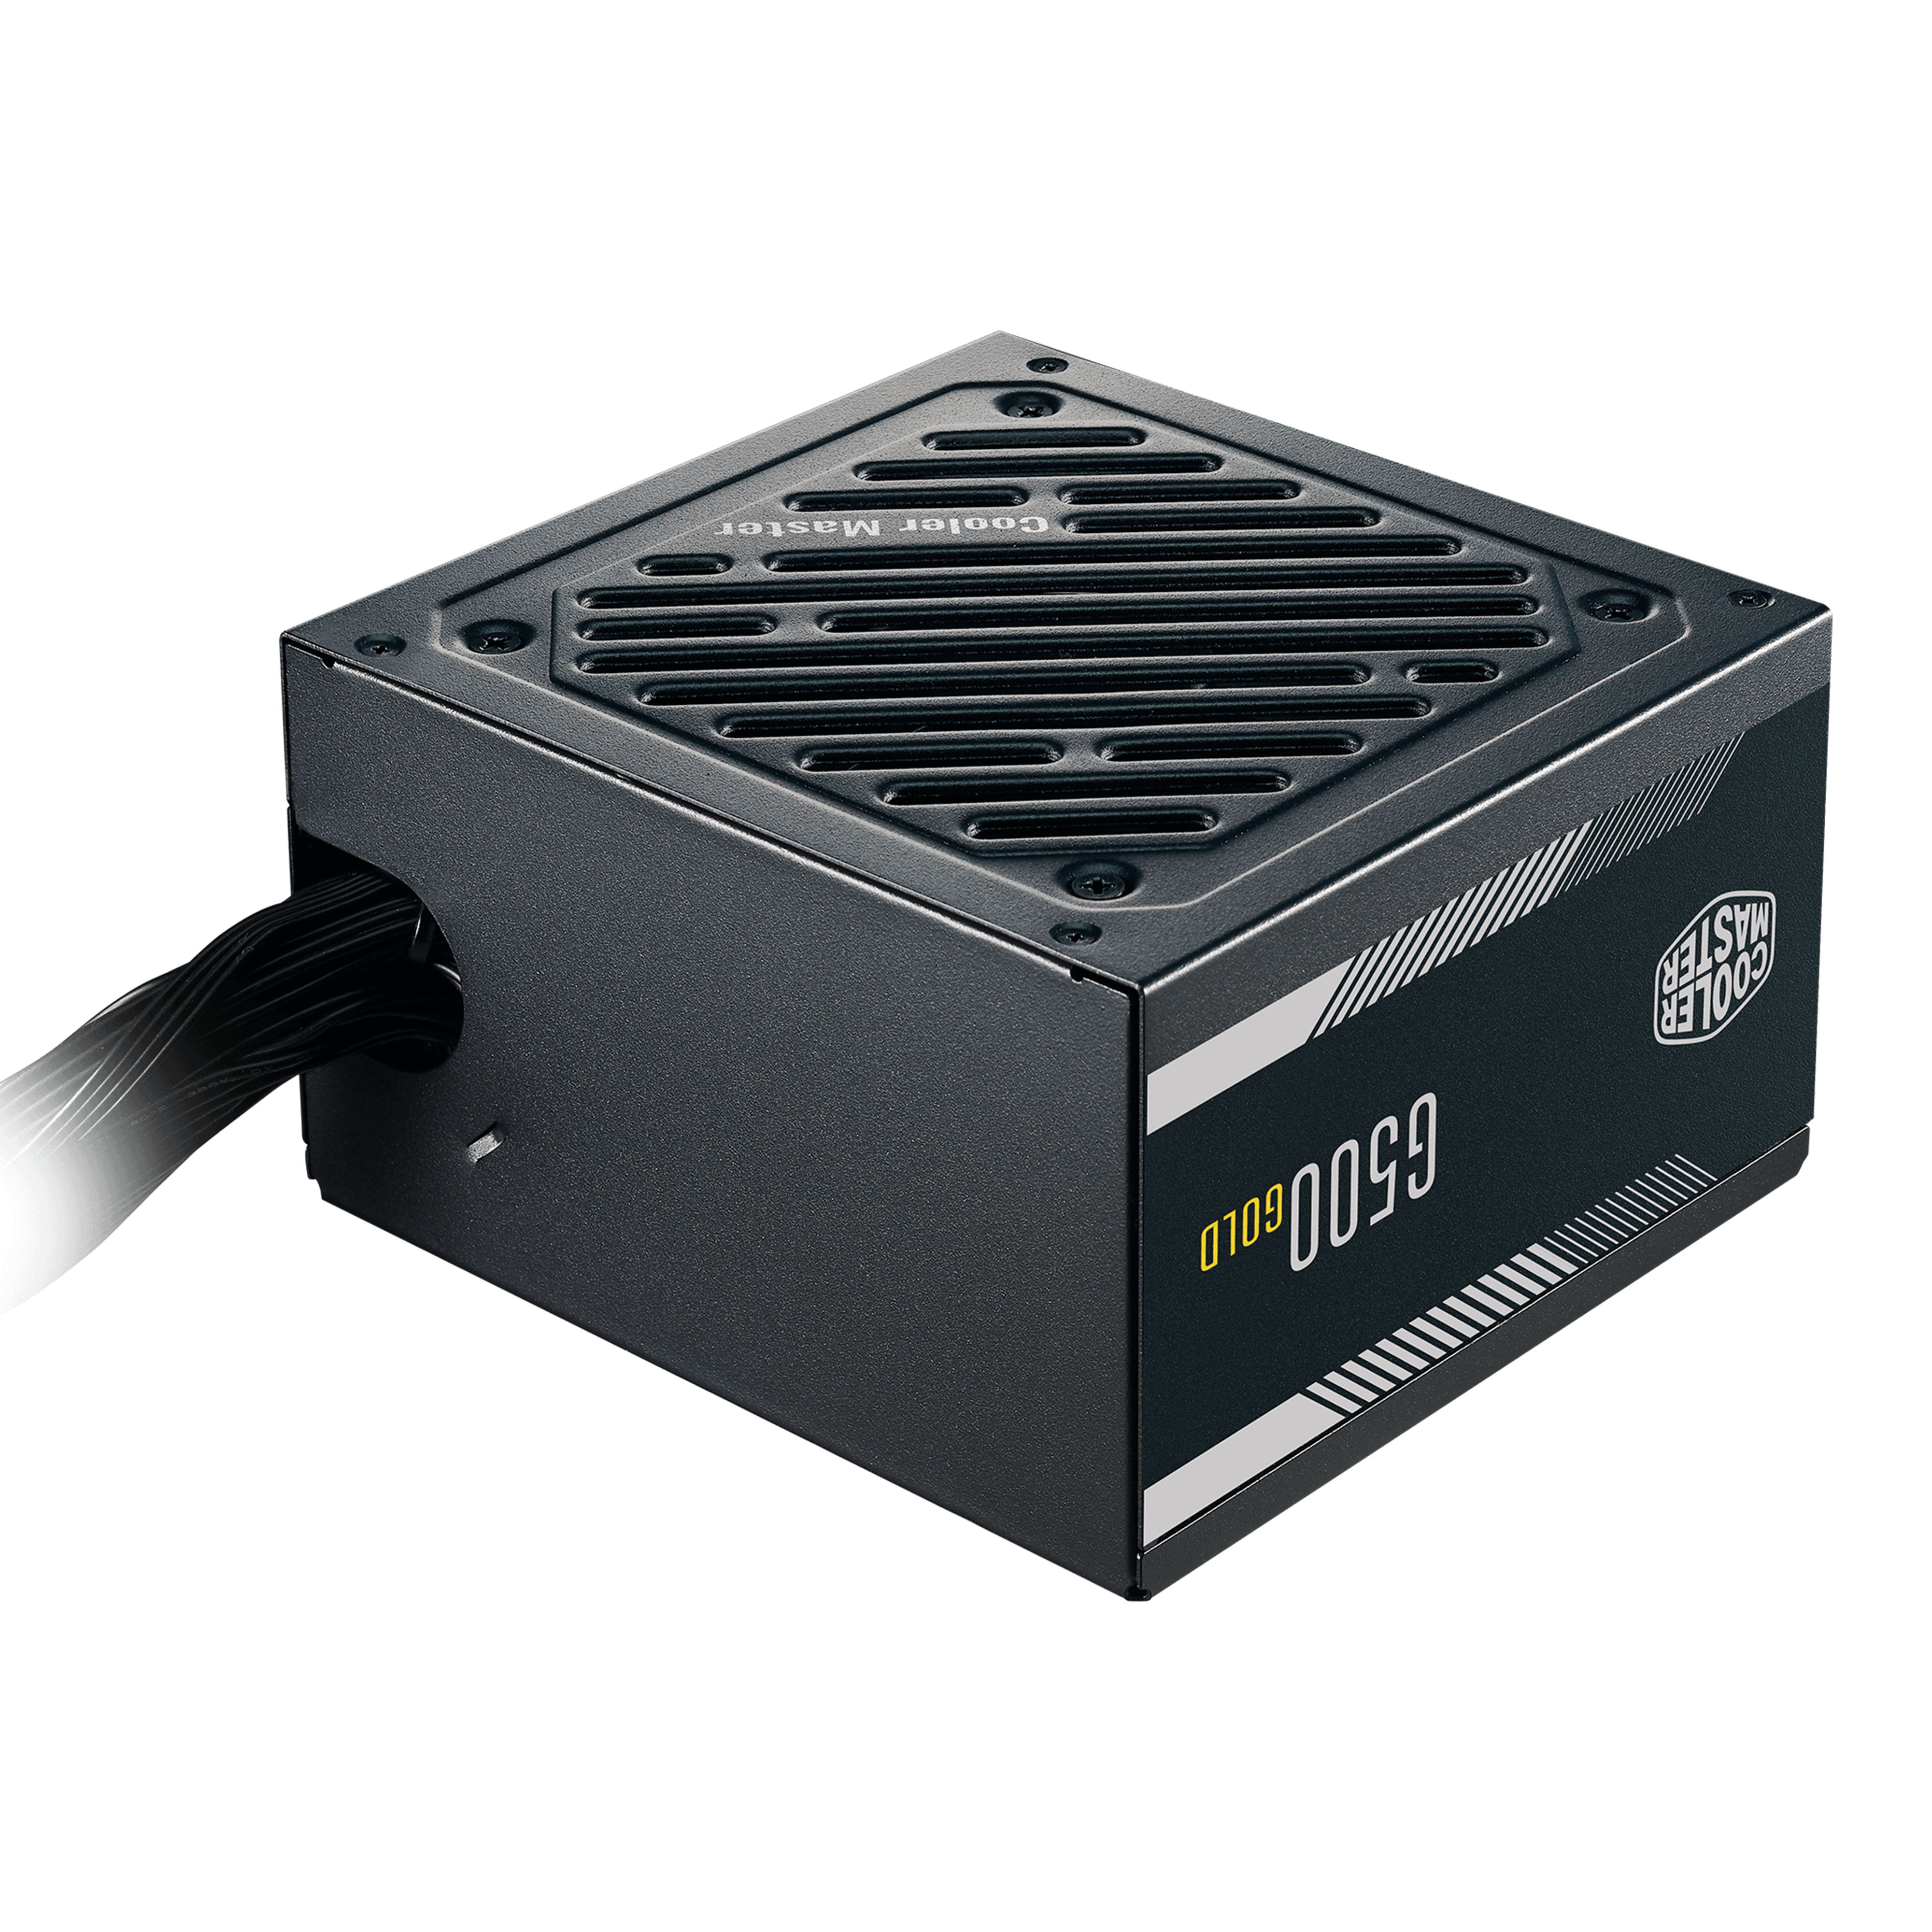 Cooler Master Cooler Master G500 Gold Power Supply, 500W 80+ Gold  Efficiency, Intel ATX Version 2.52, Fixed Flat Black Cables Quiet HDB Fan,  Year Warran